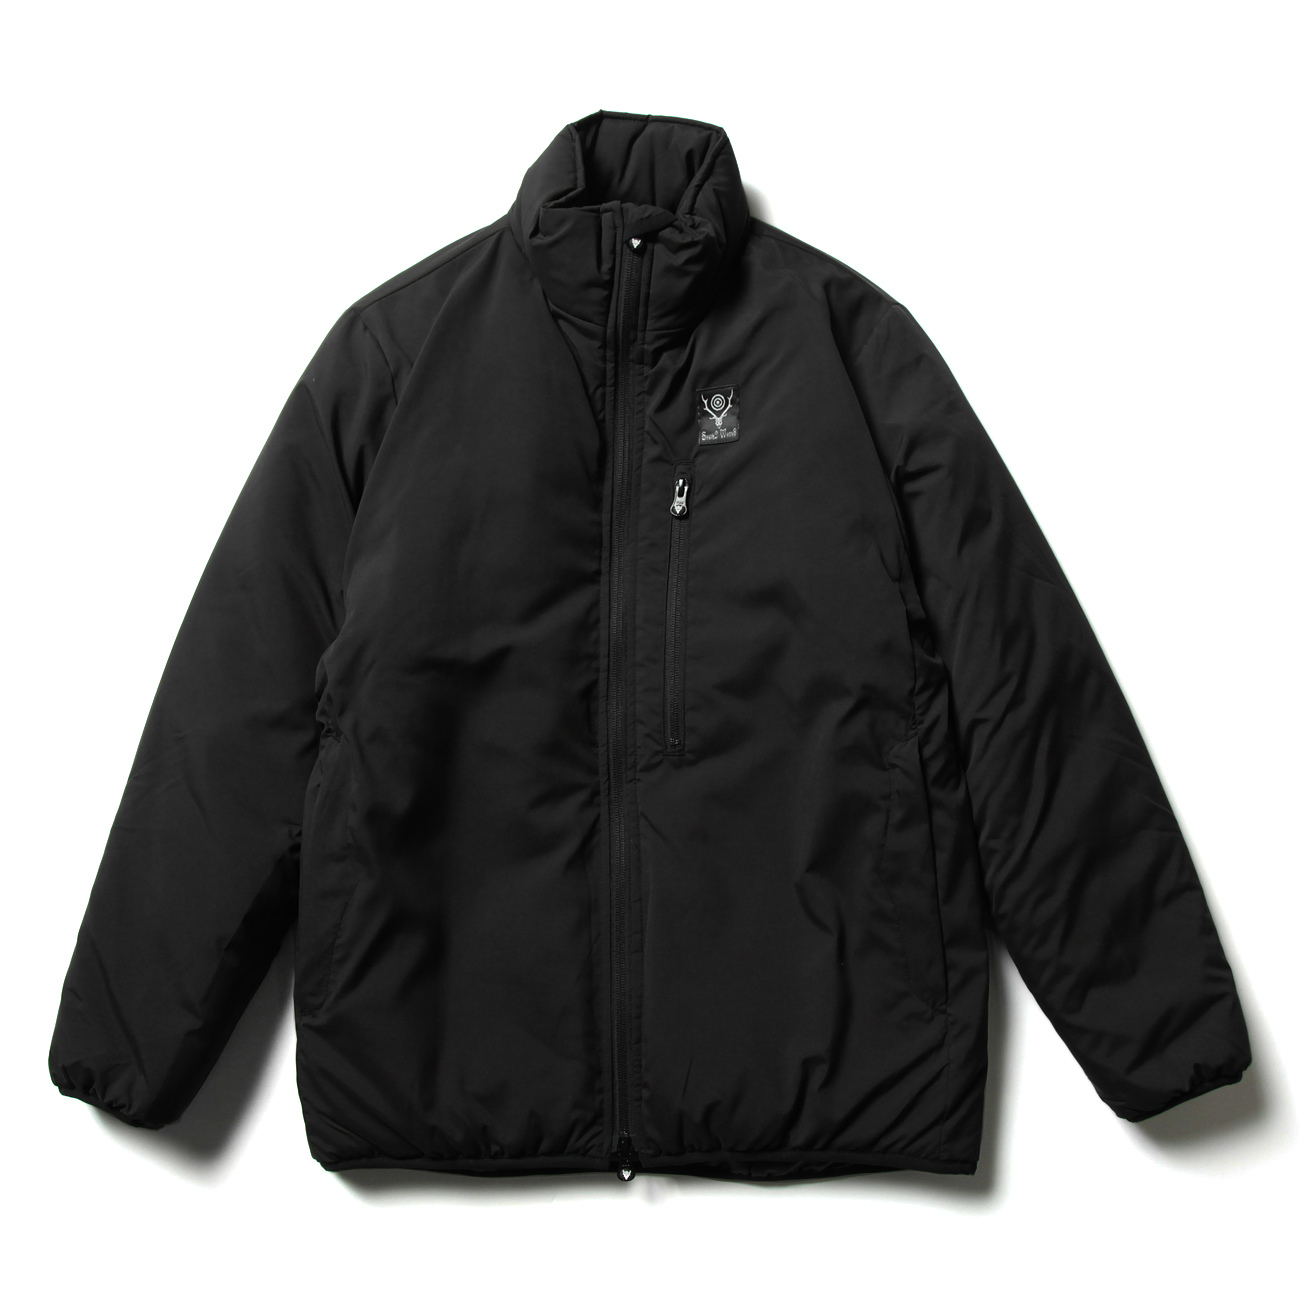 South2 West8 / サウスツーウエストエイト | Insulator Jacket - Poly ...